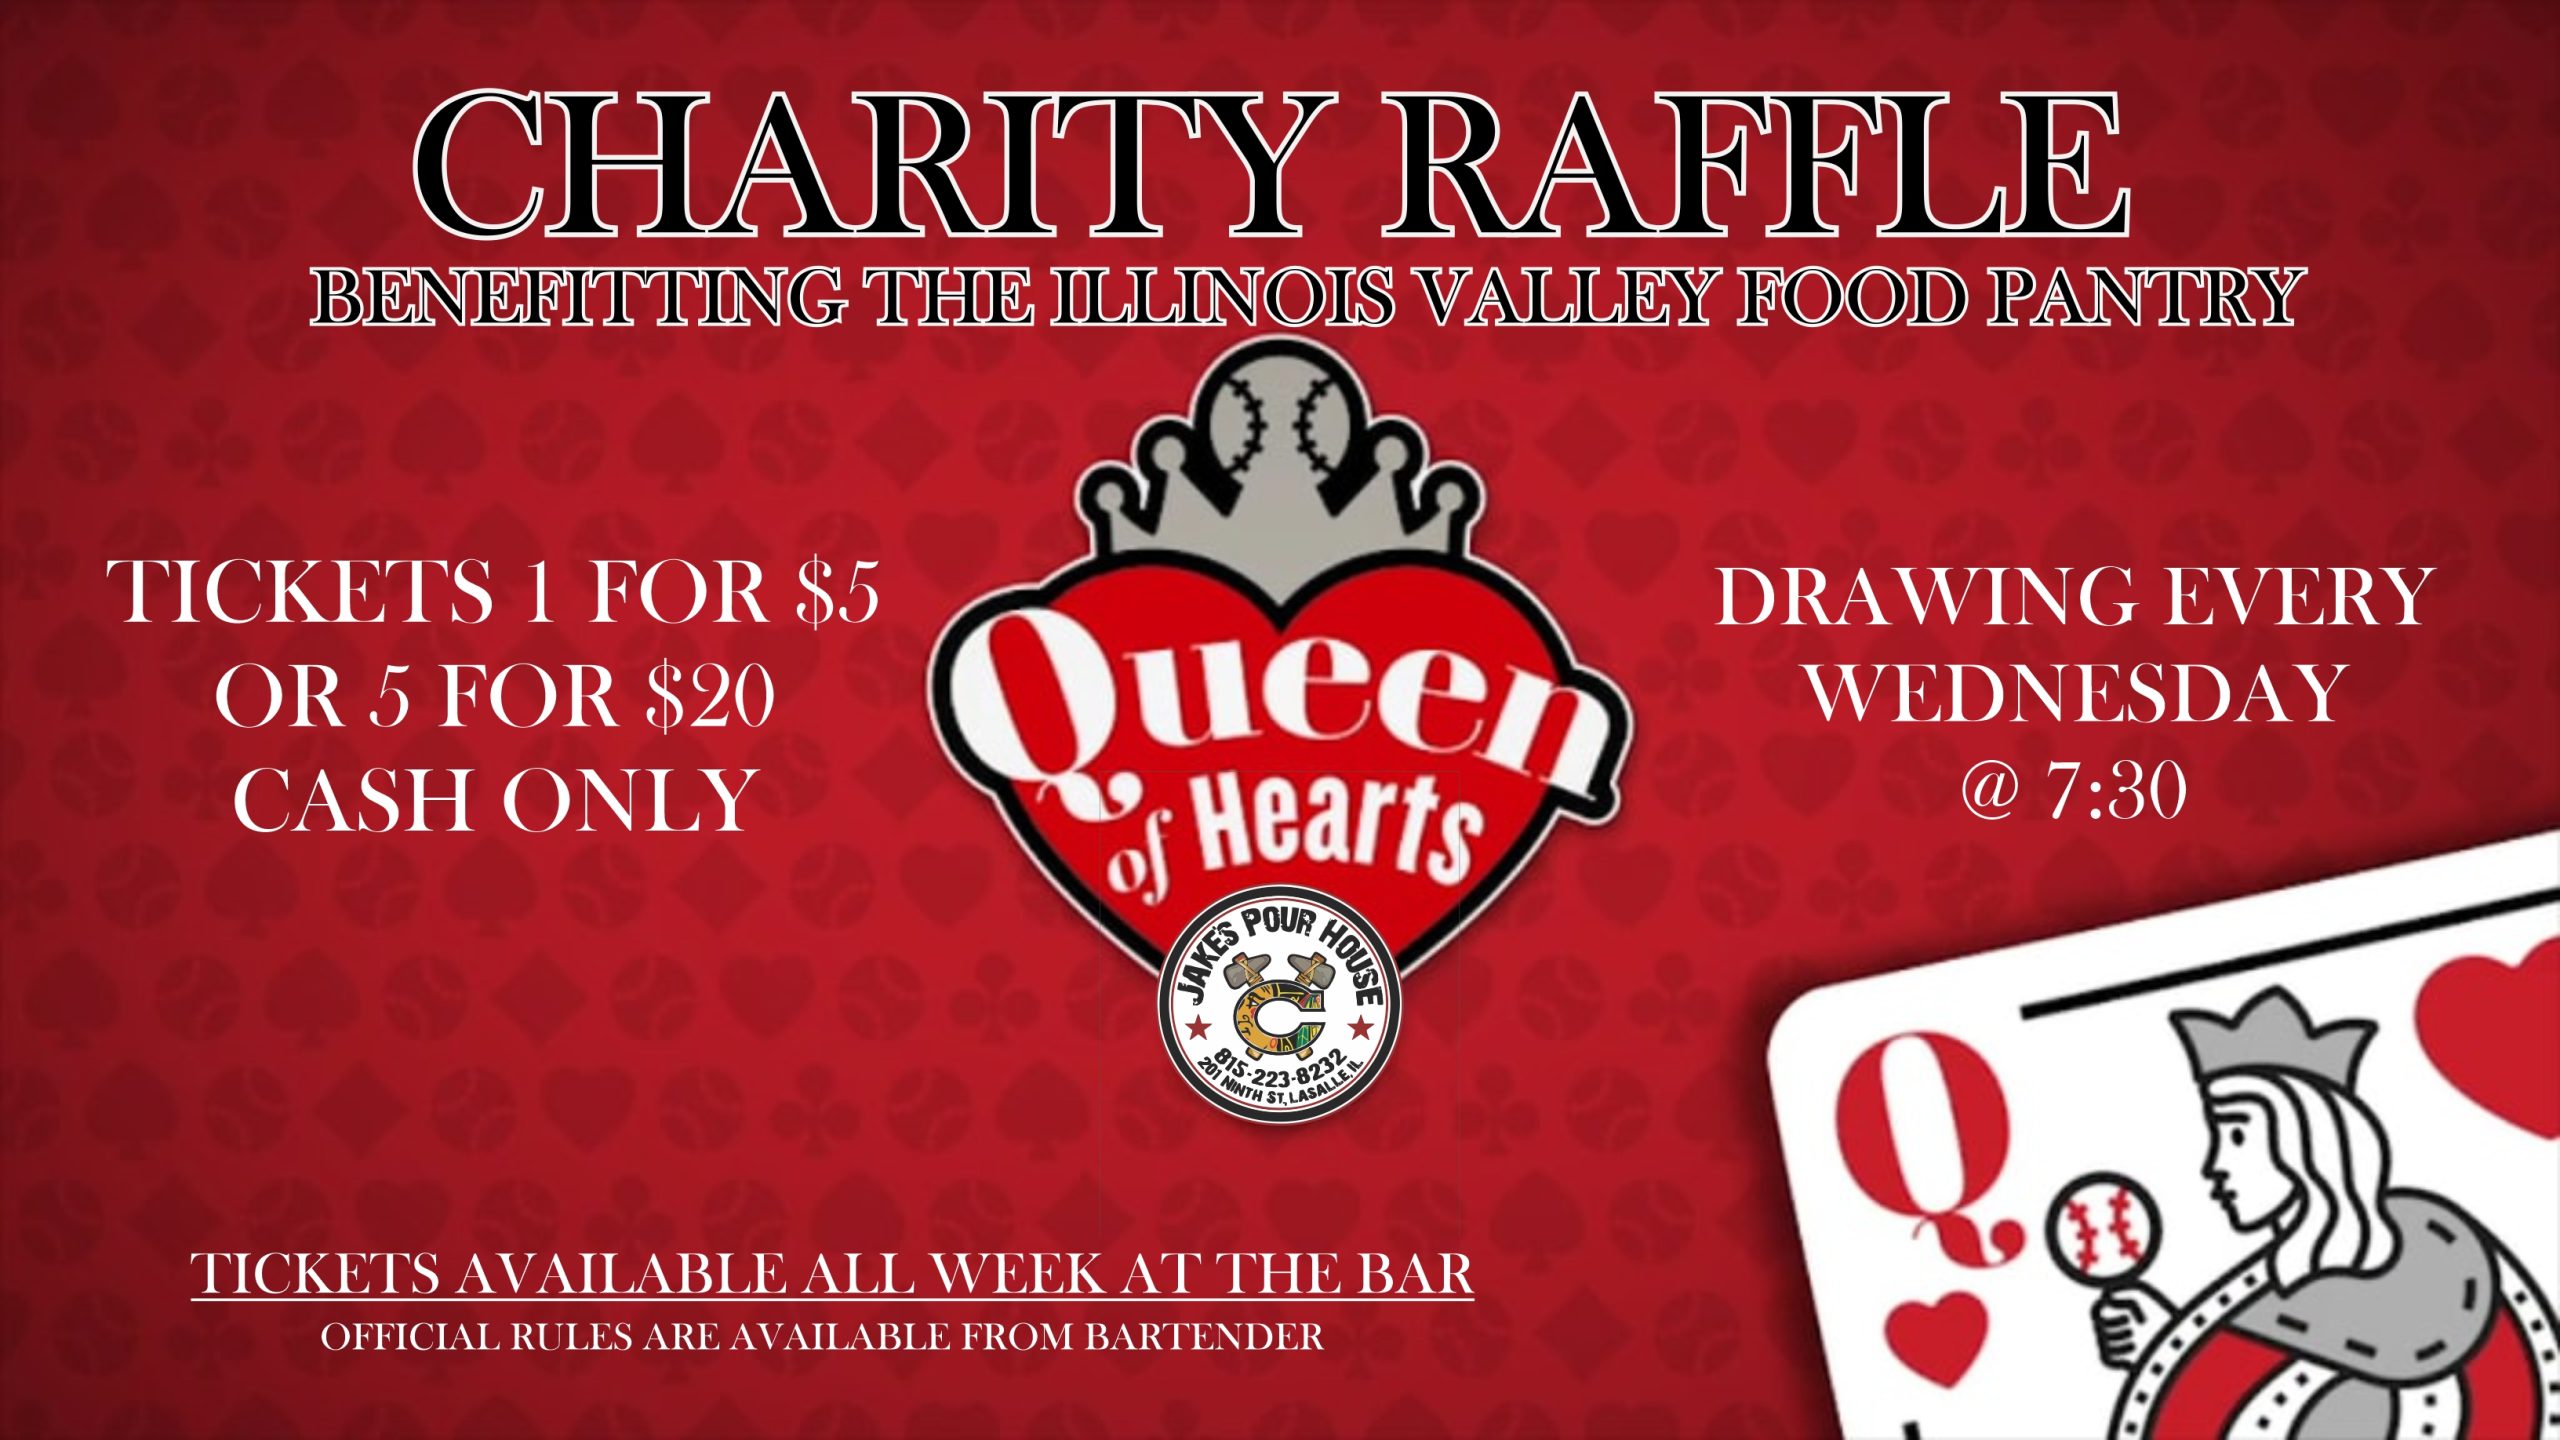 Charity Raffle benefitting the Illinois Valley Food Pantry Queen of Hearts Drawing.